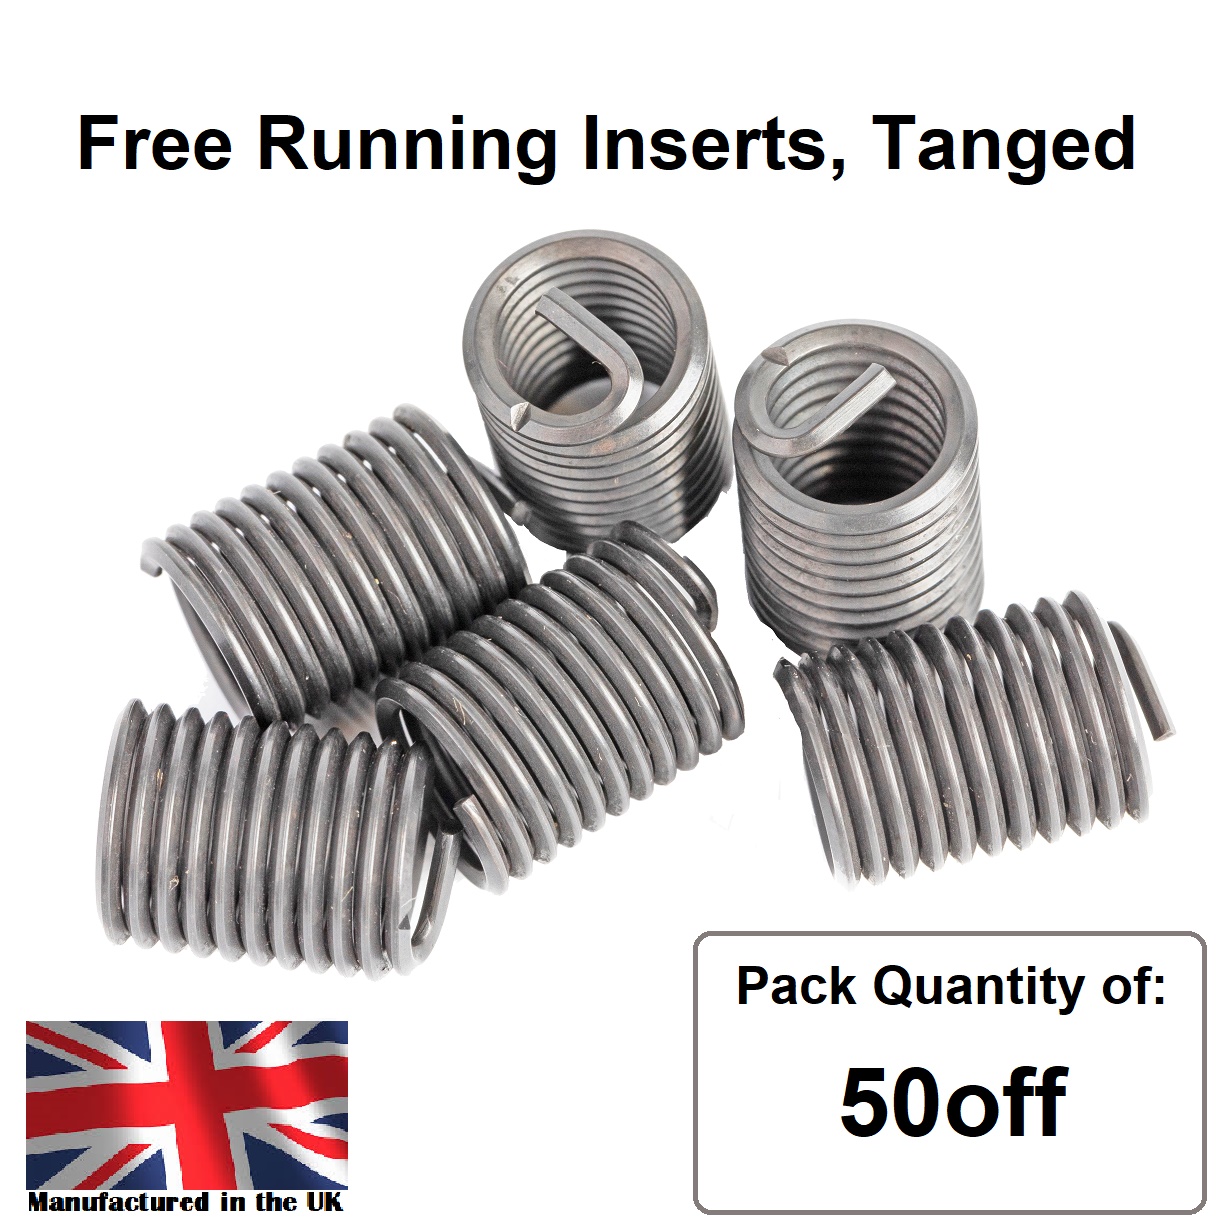 8-32 x 1D UNC, Free Running, Tanged, Wire Thread Repair Insert, 304/A2 Stainless (Pack 50)